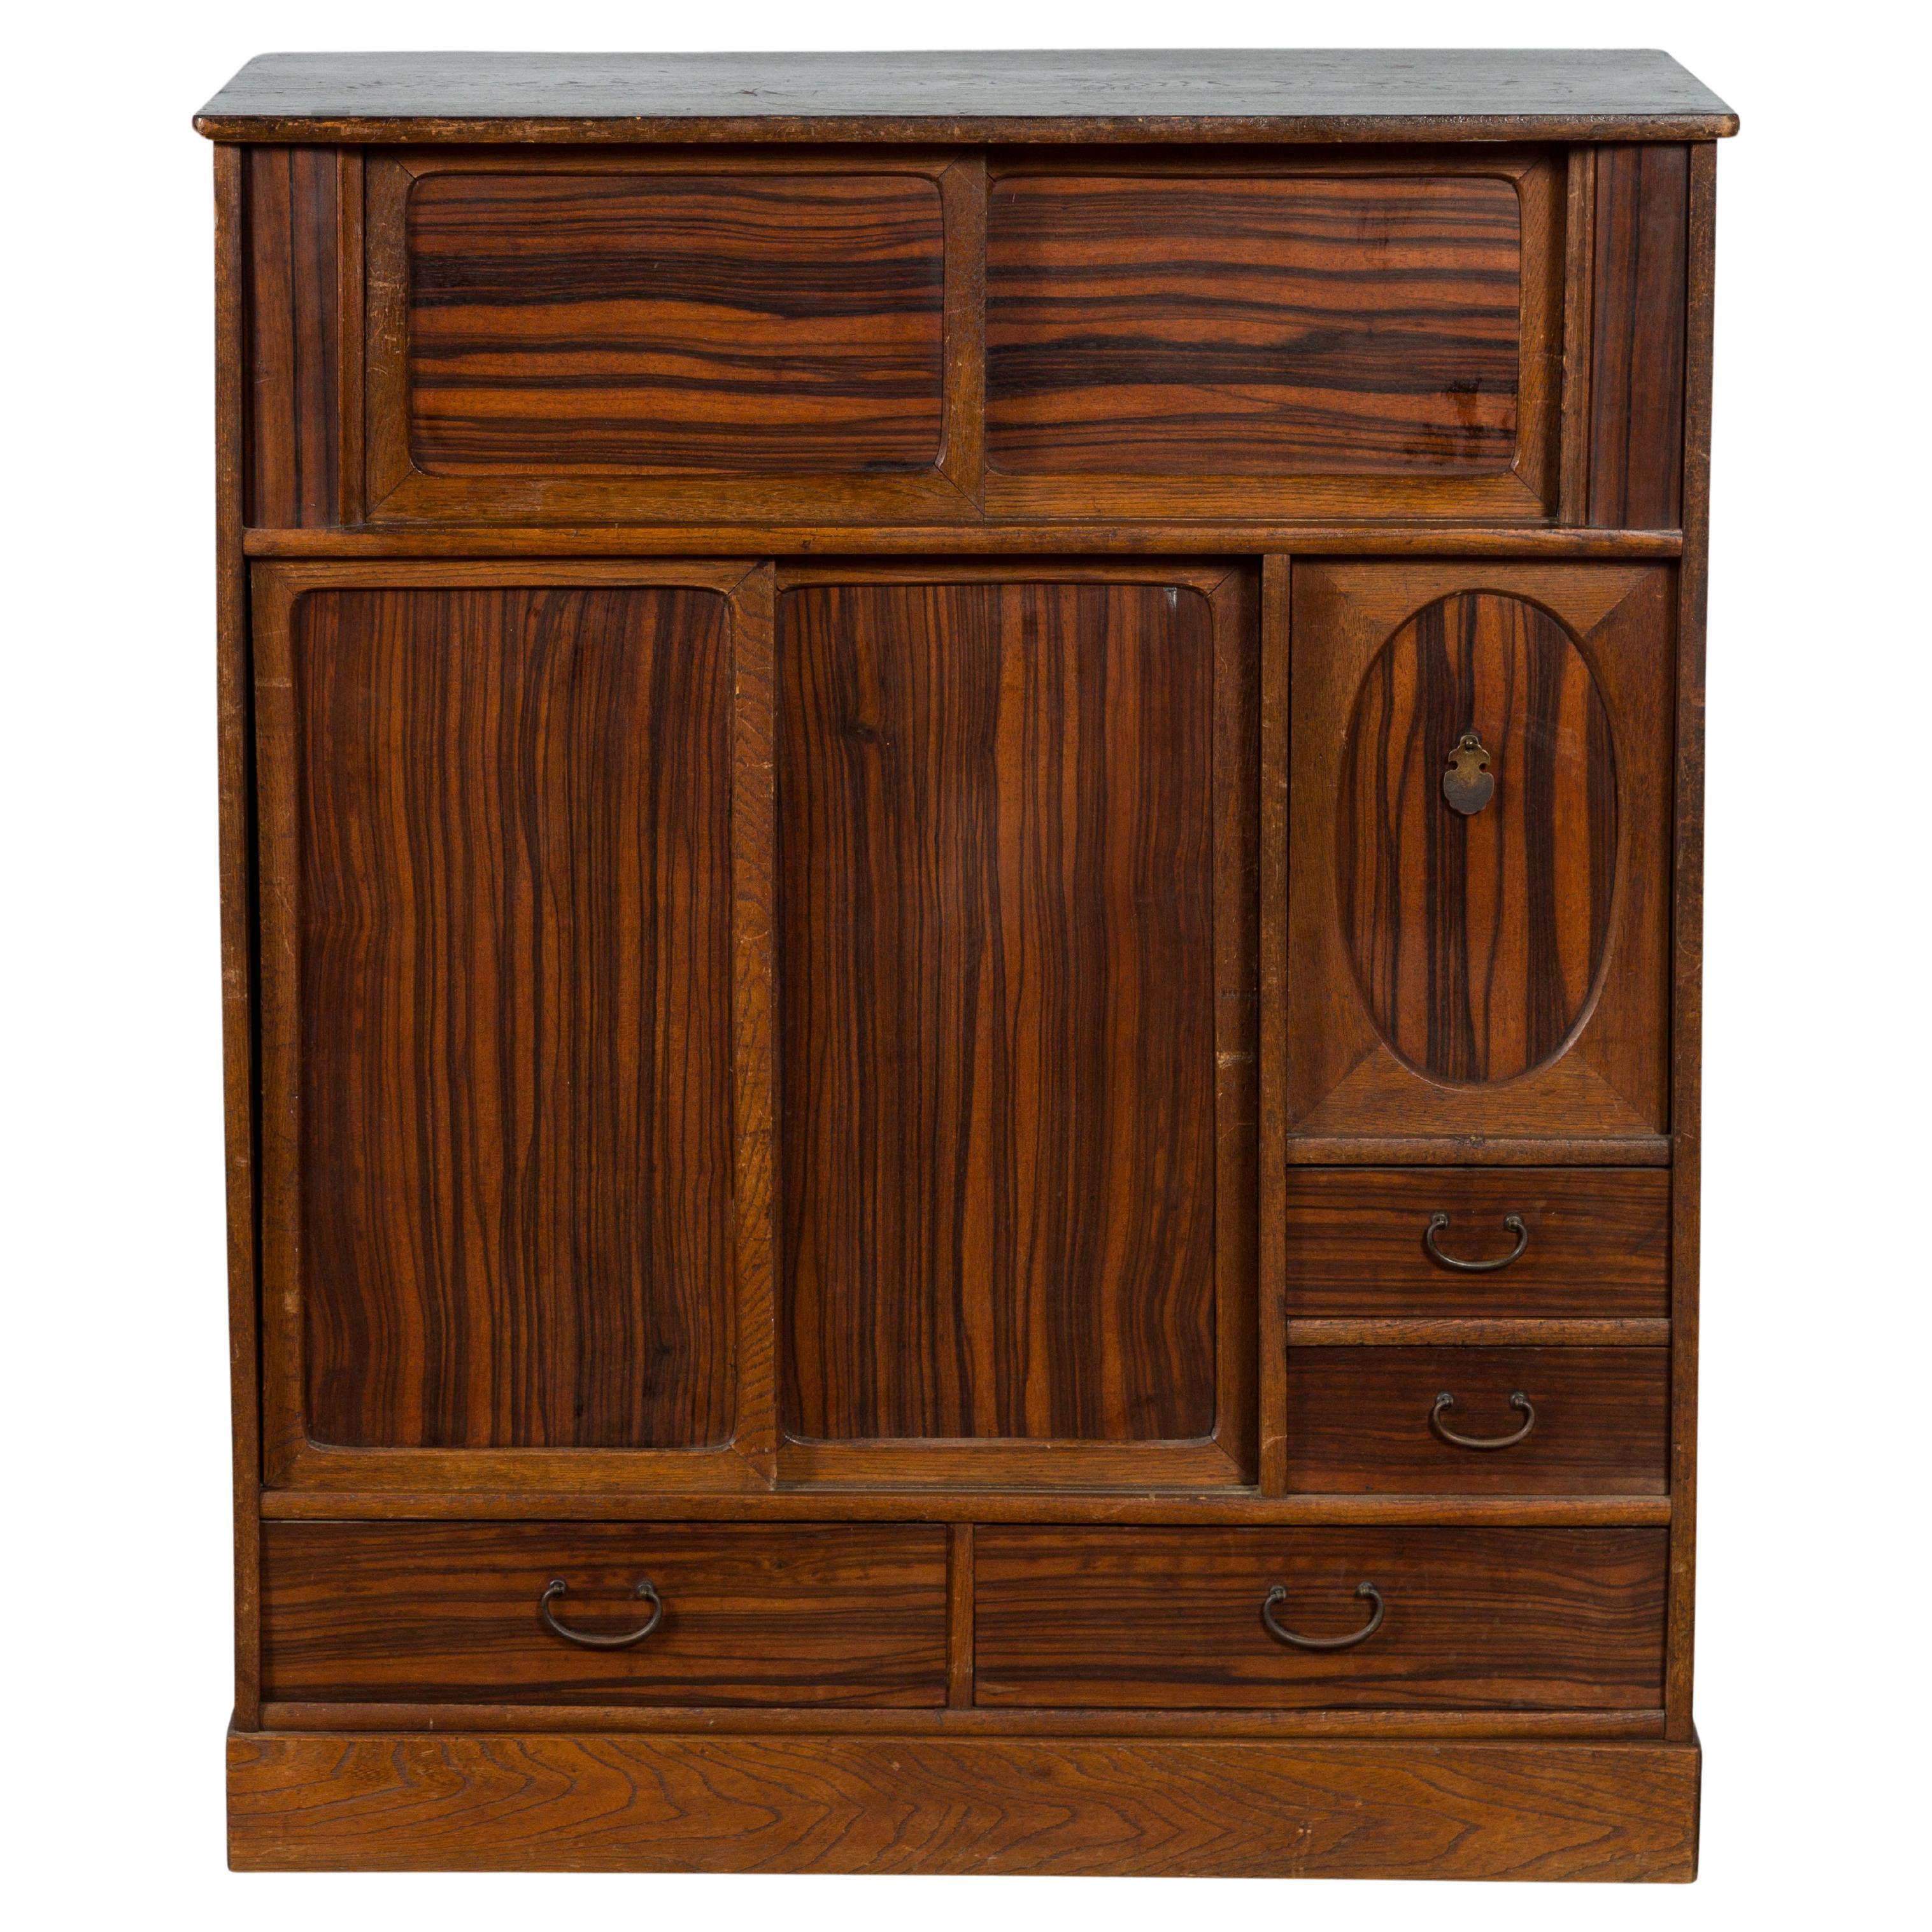 Japanese 19th Century Zebra Wood Cabinet with Sliding Doors, Panel and Drawers